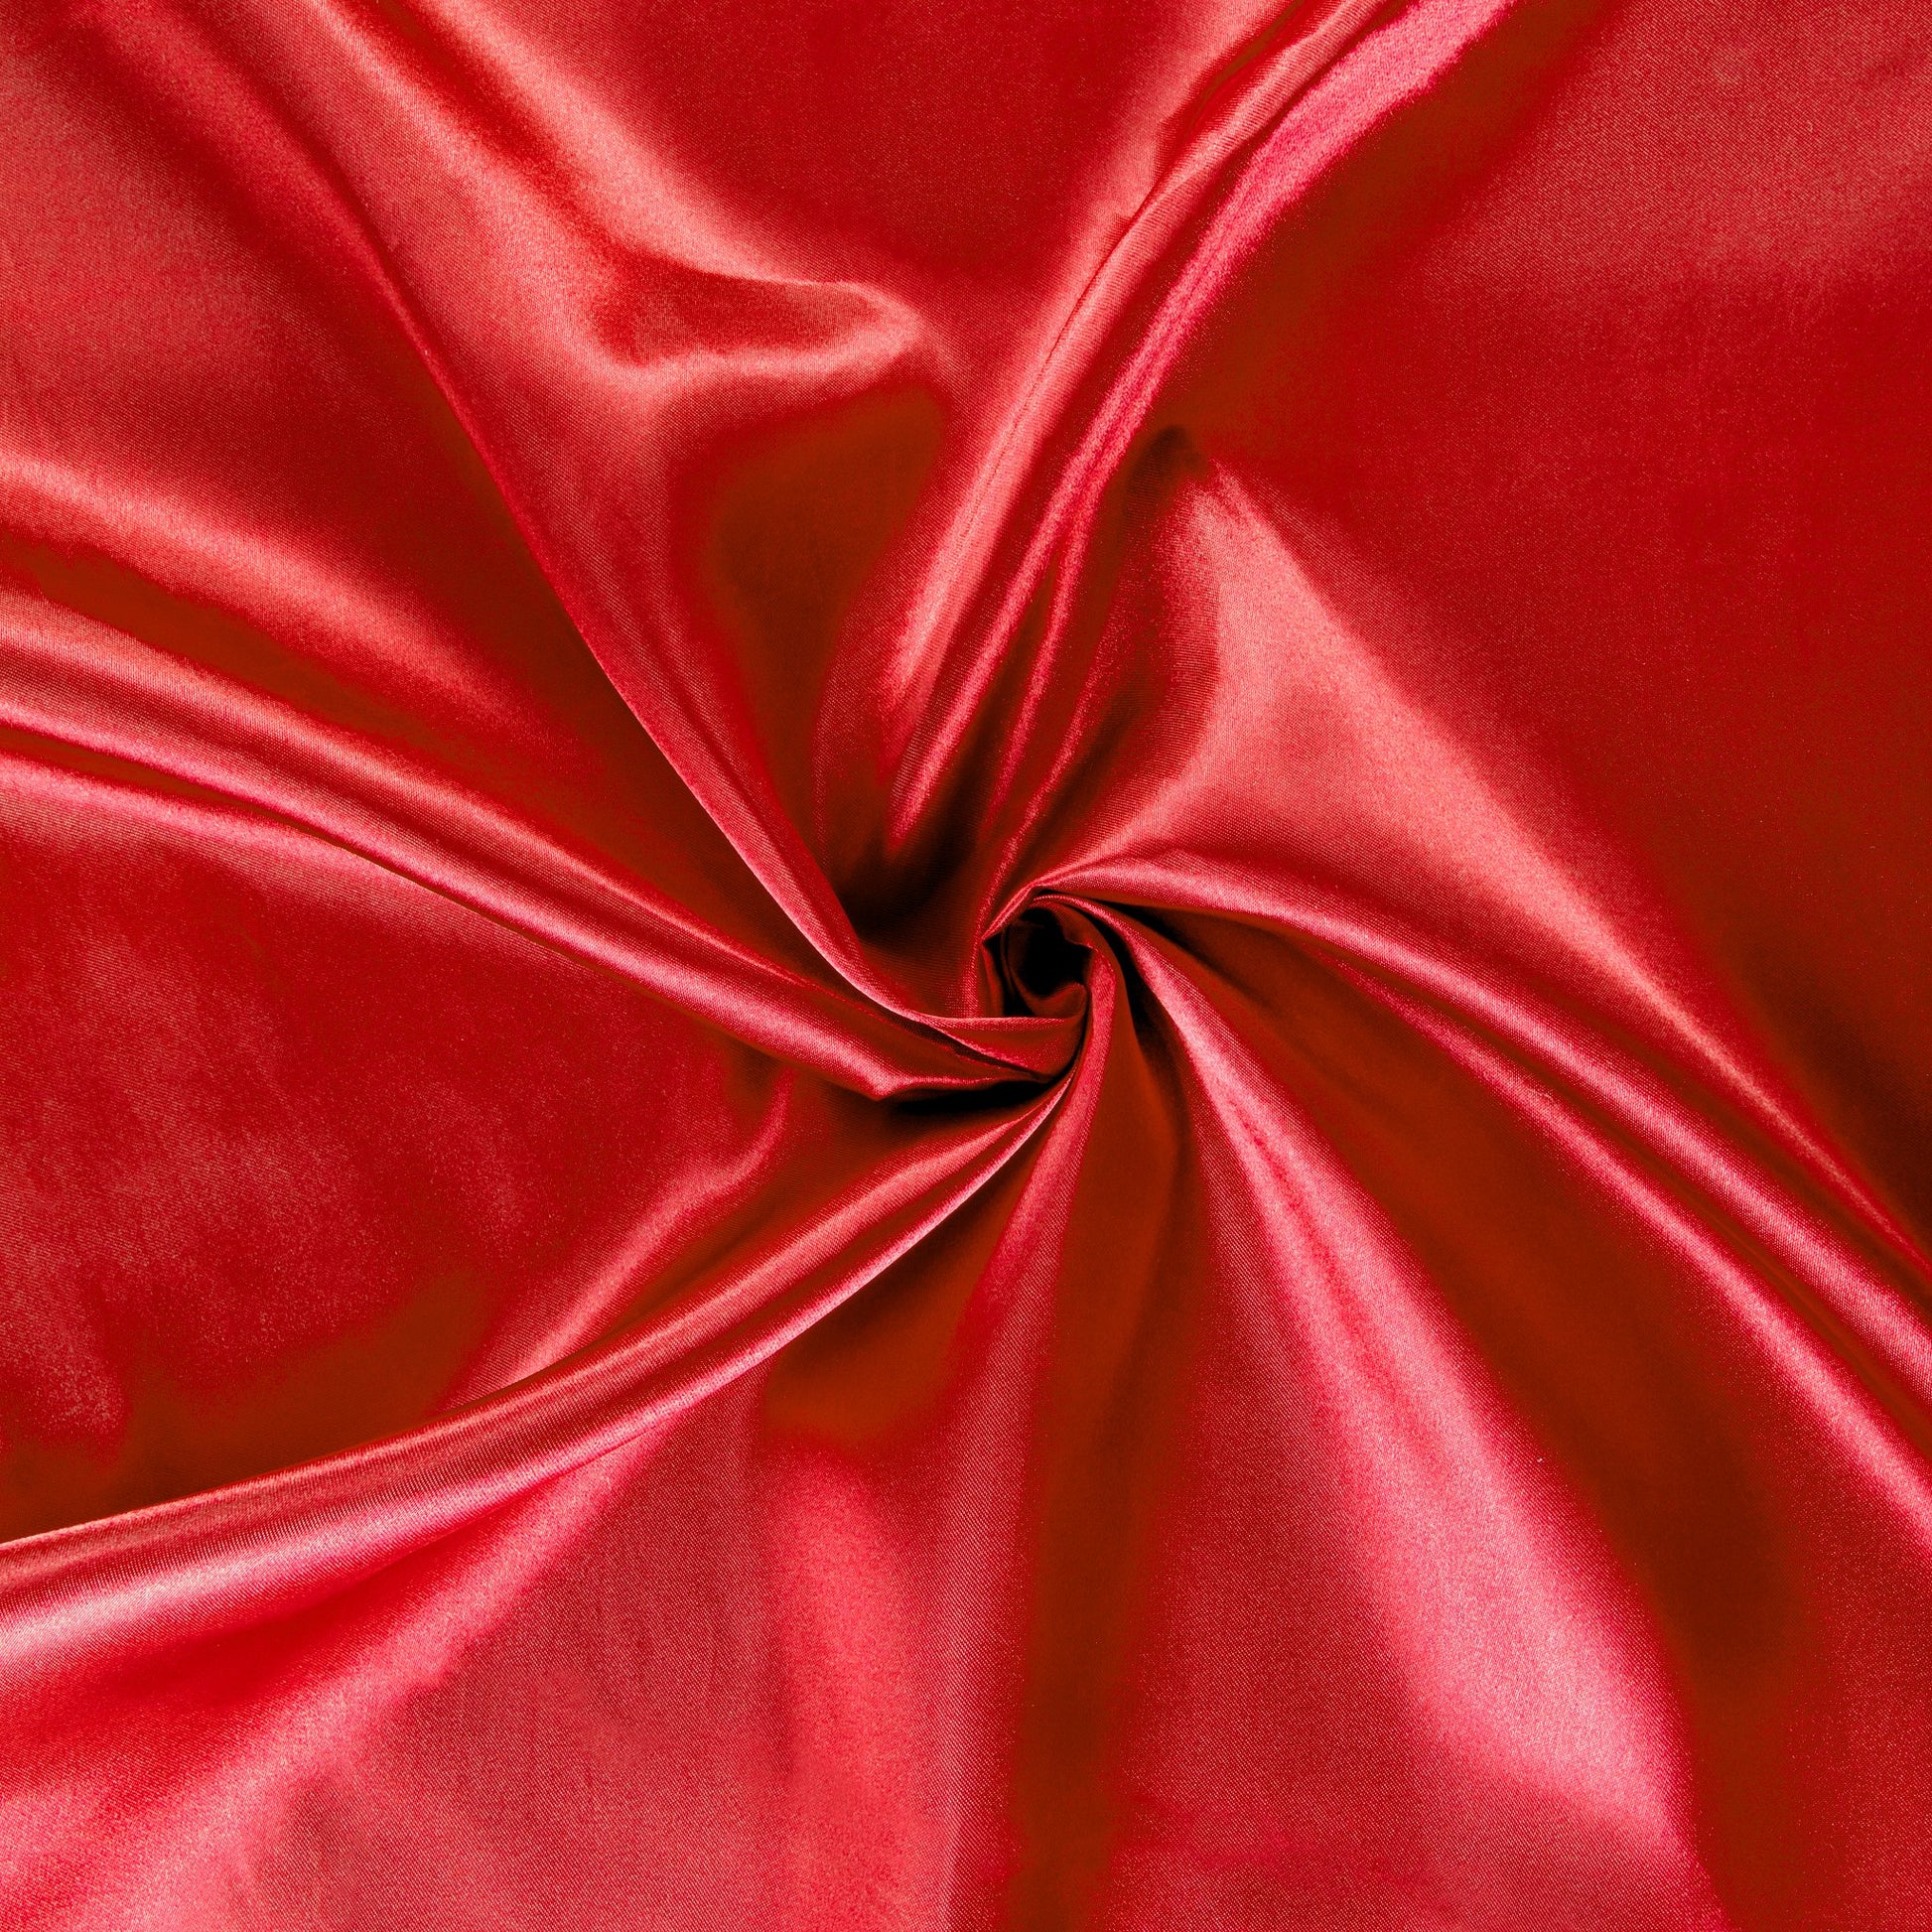 40 yds Satin Fabric Roll - Red